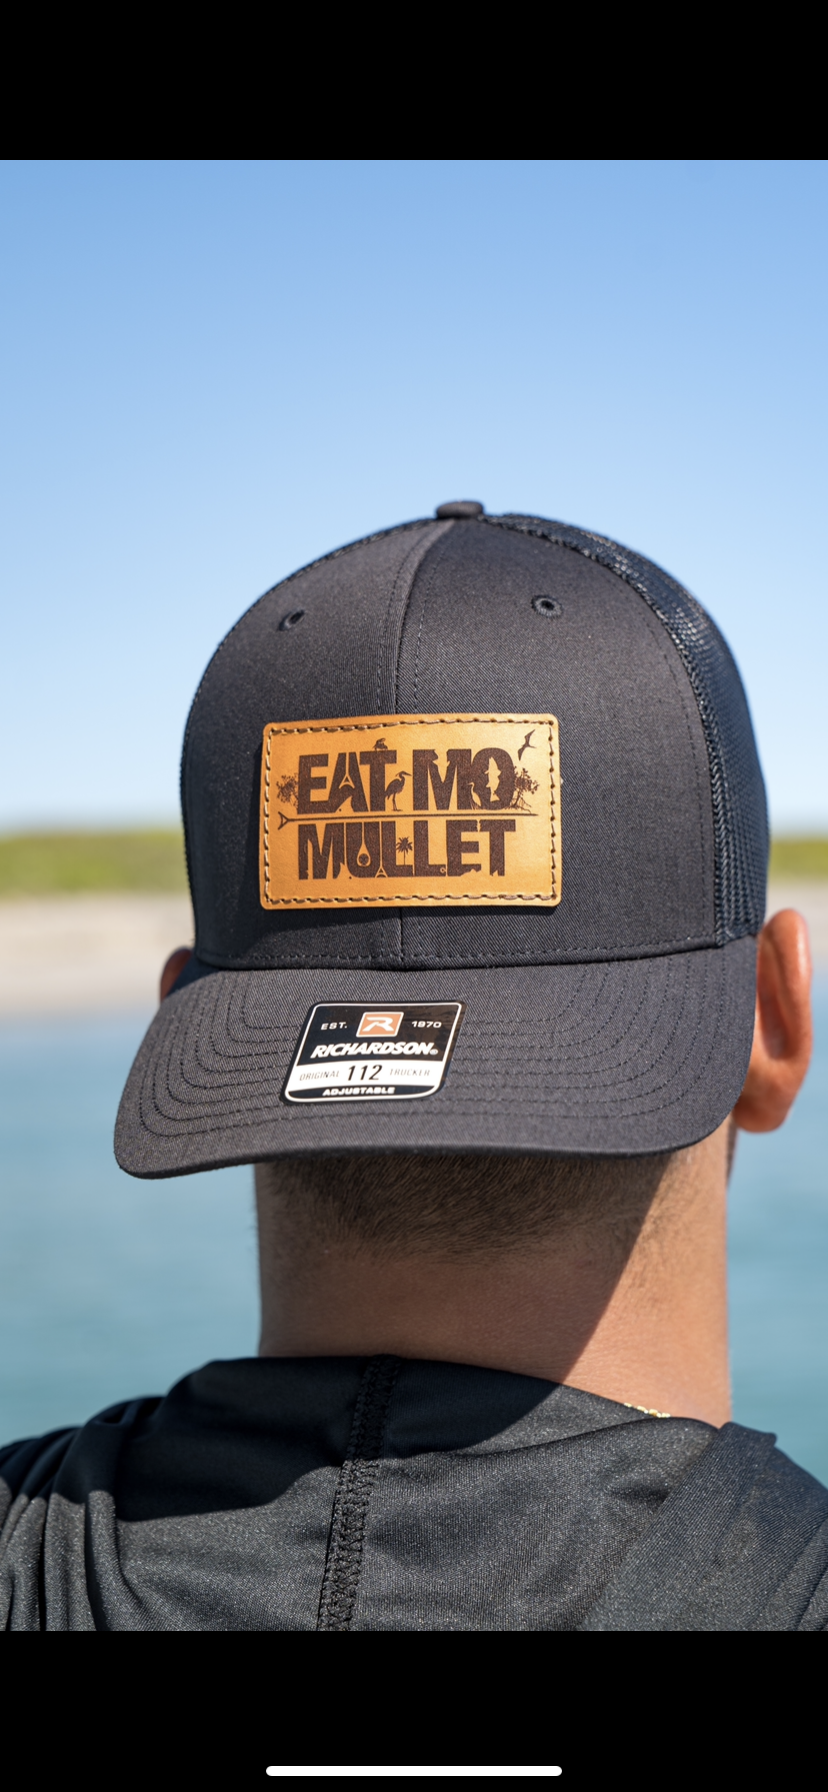 MO Leather Patch Hat